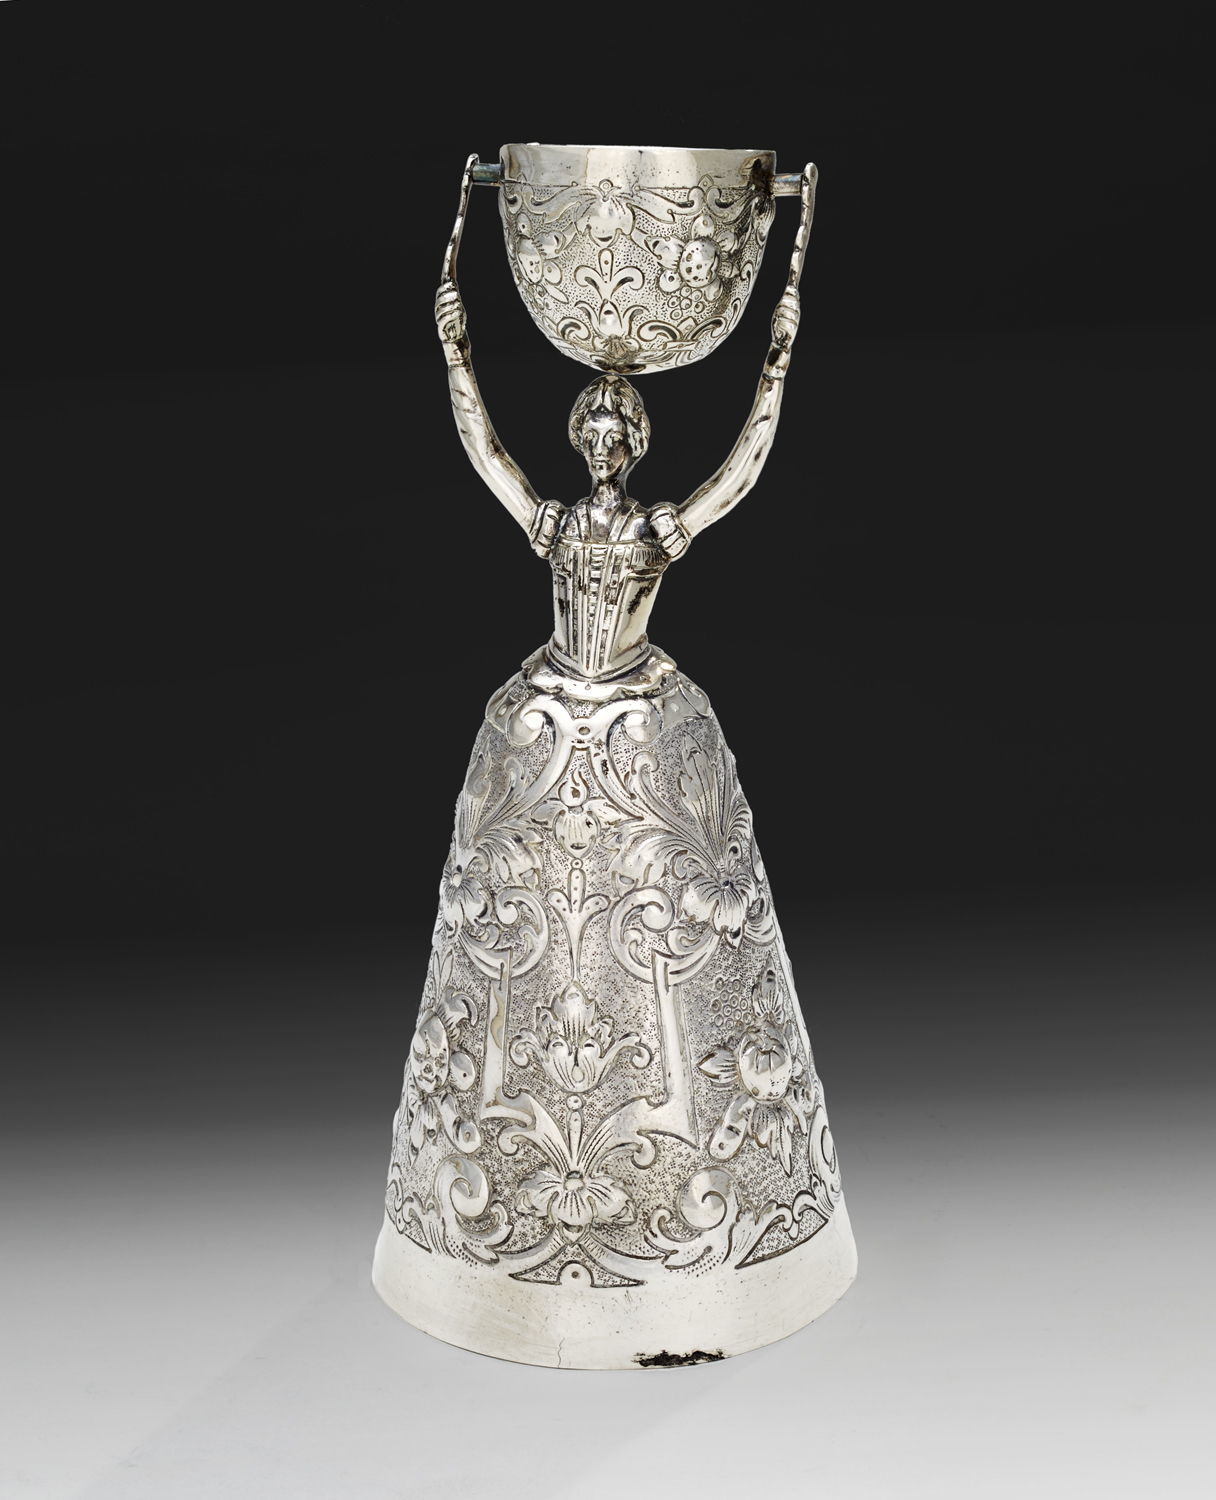 An antique wedding cup is thought to bring good luck and love to a bride. This German cup sold for $522.